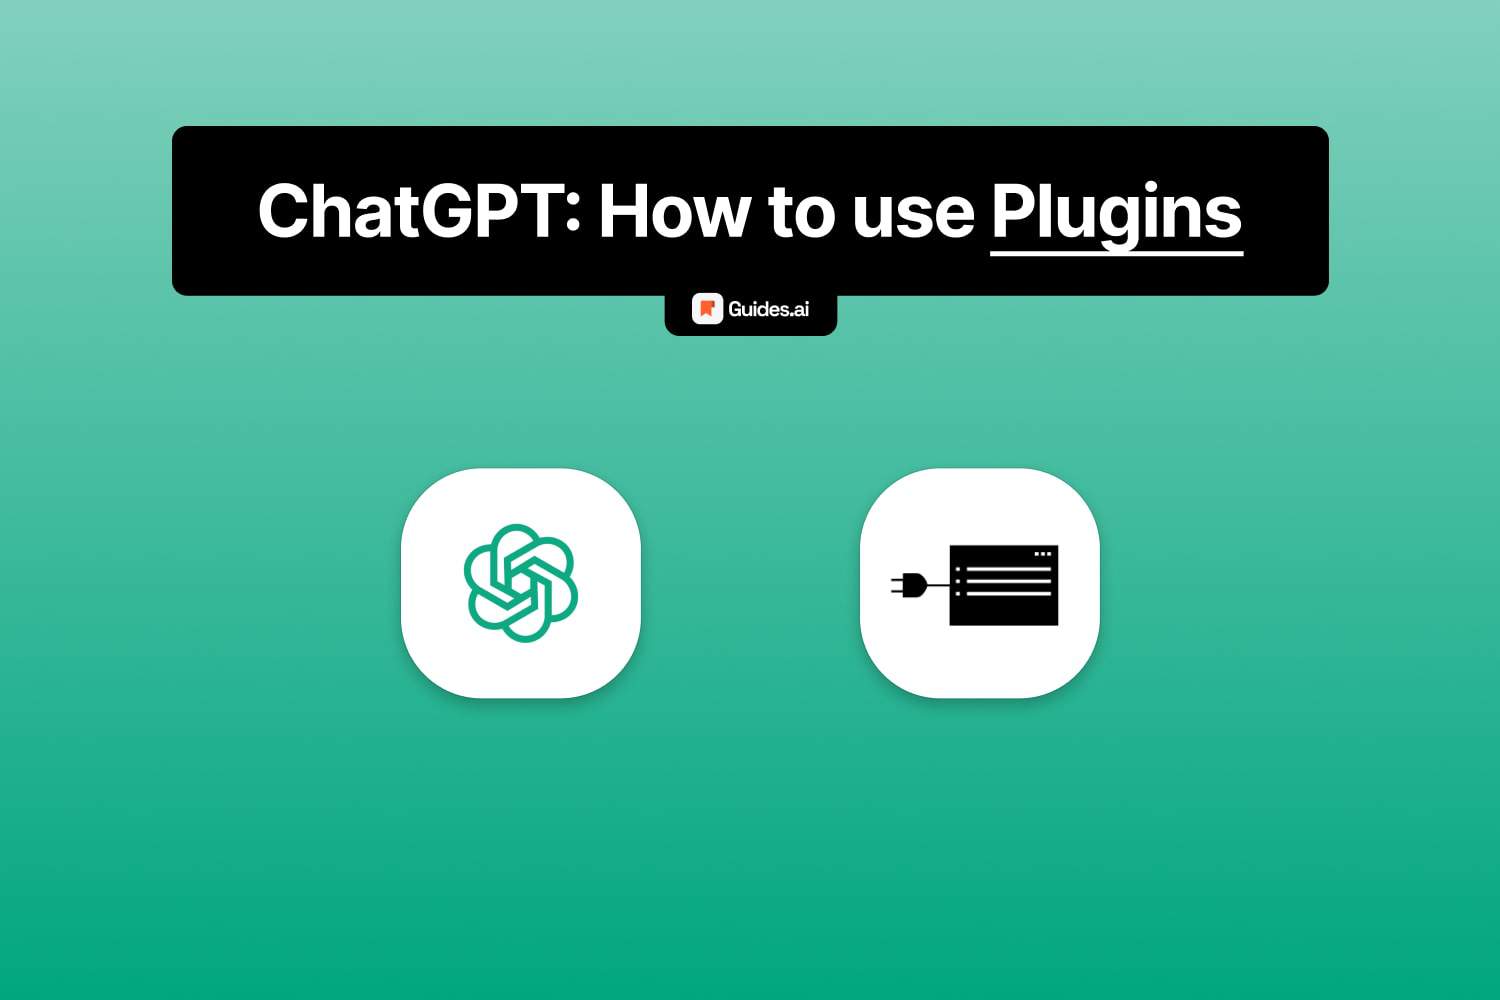 How to use ChatGPT Plugins